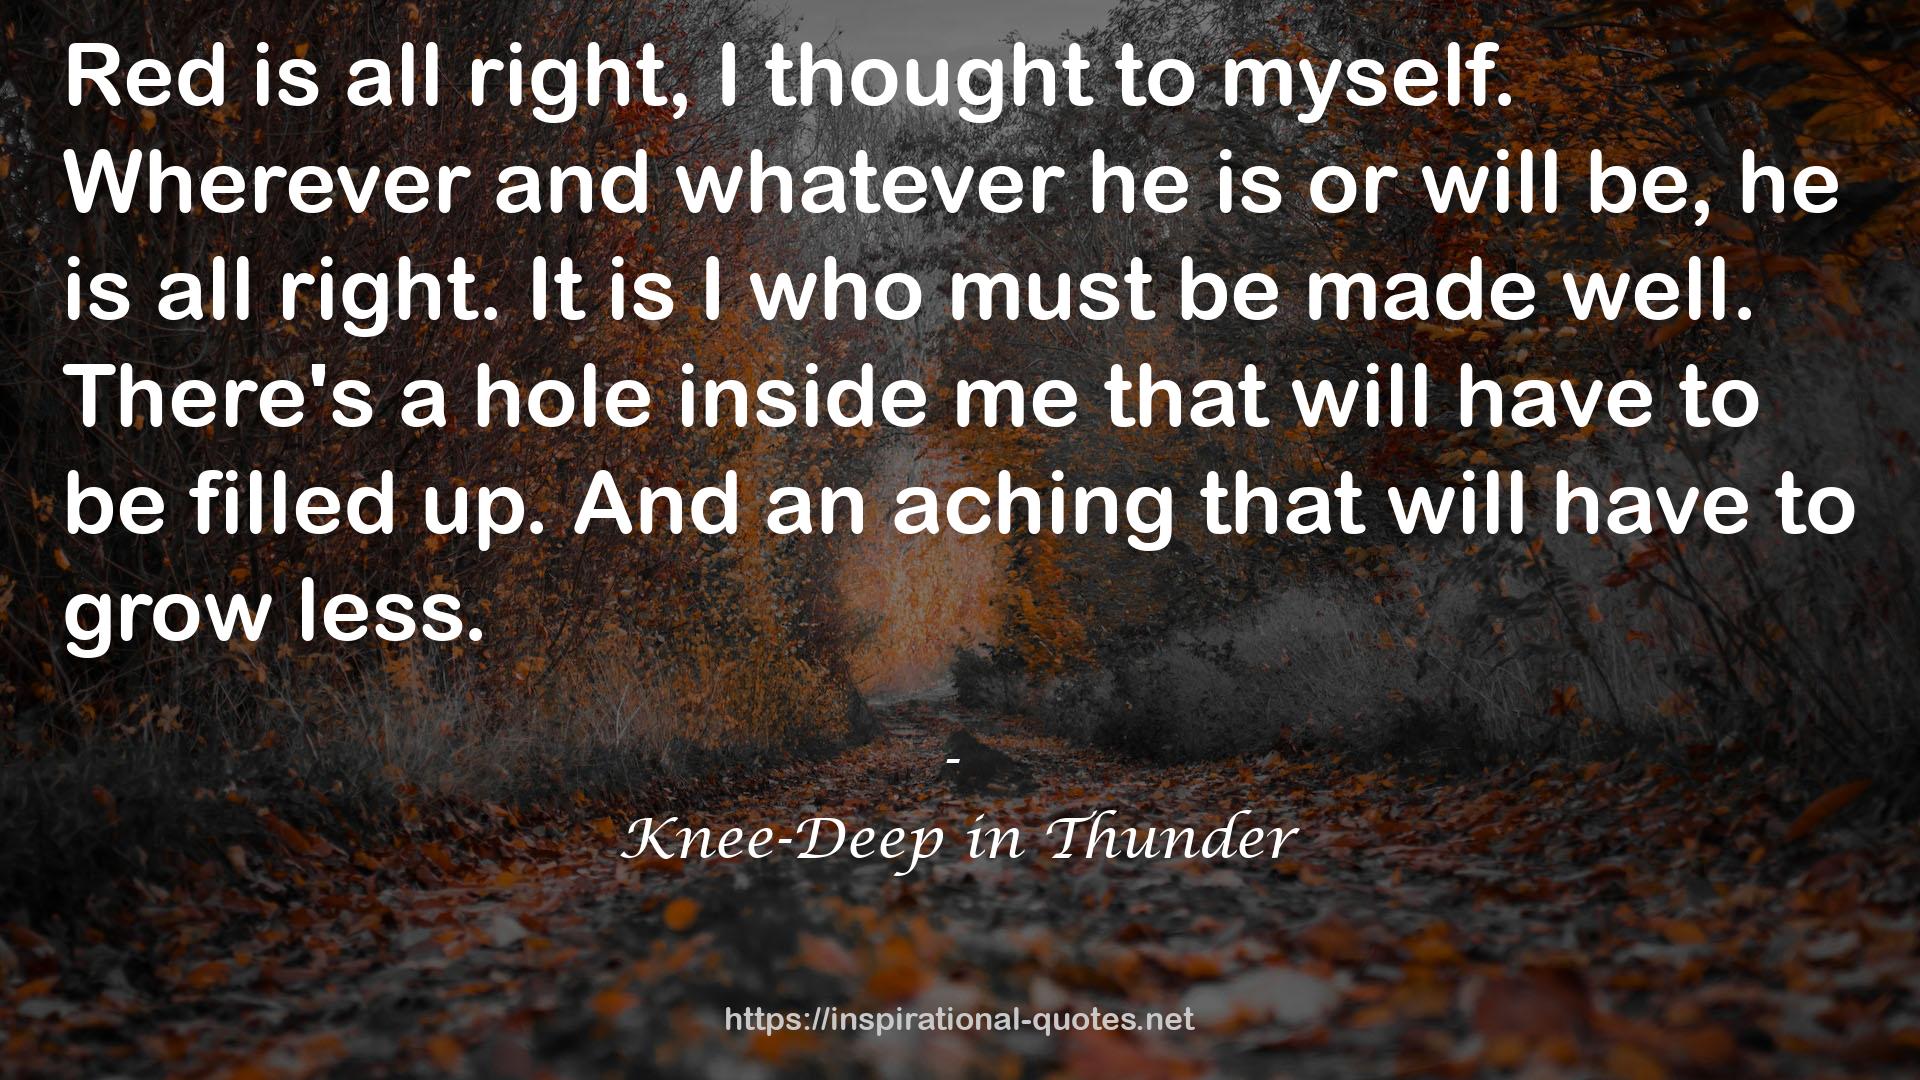 Knee-Deep in Thunder QUOTES